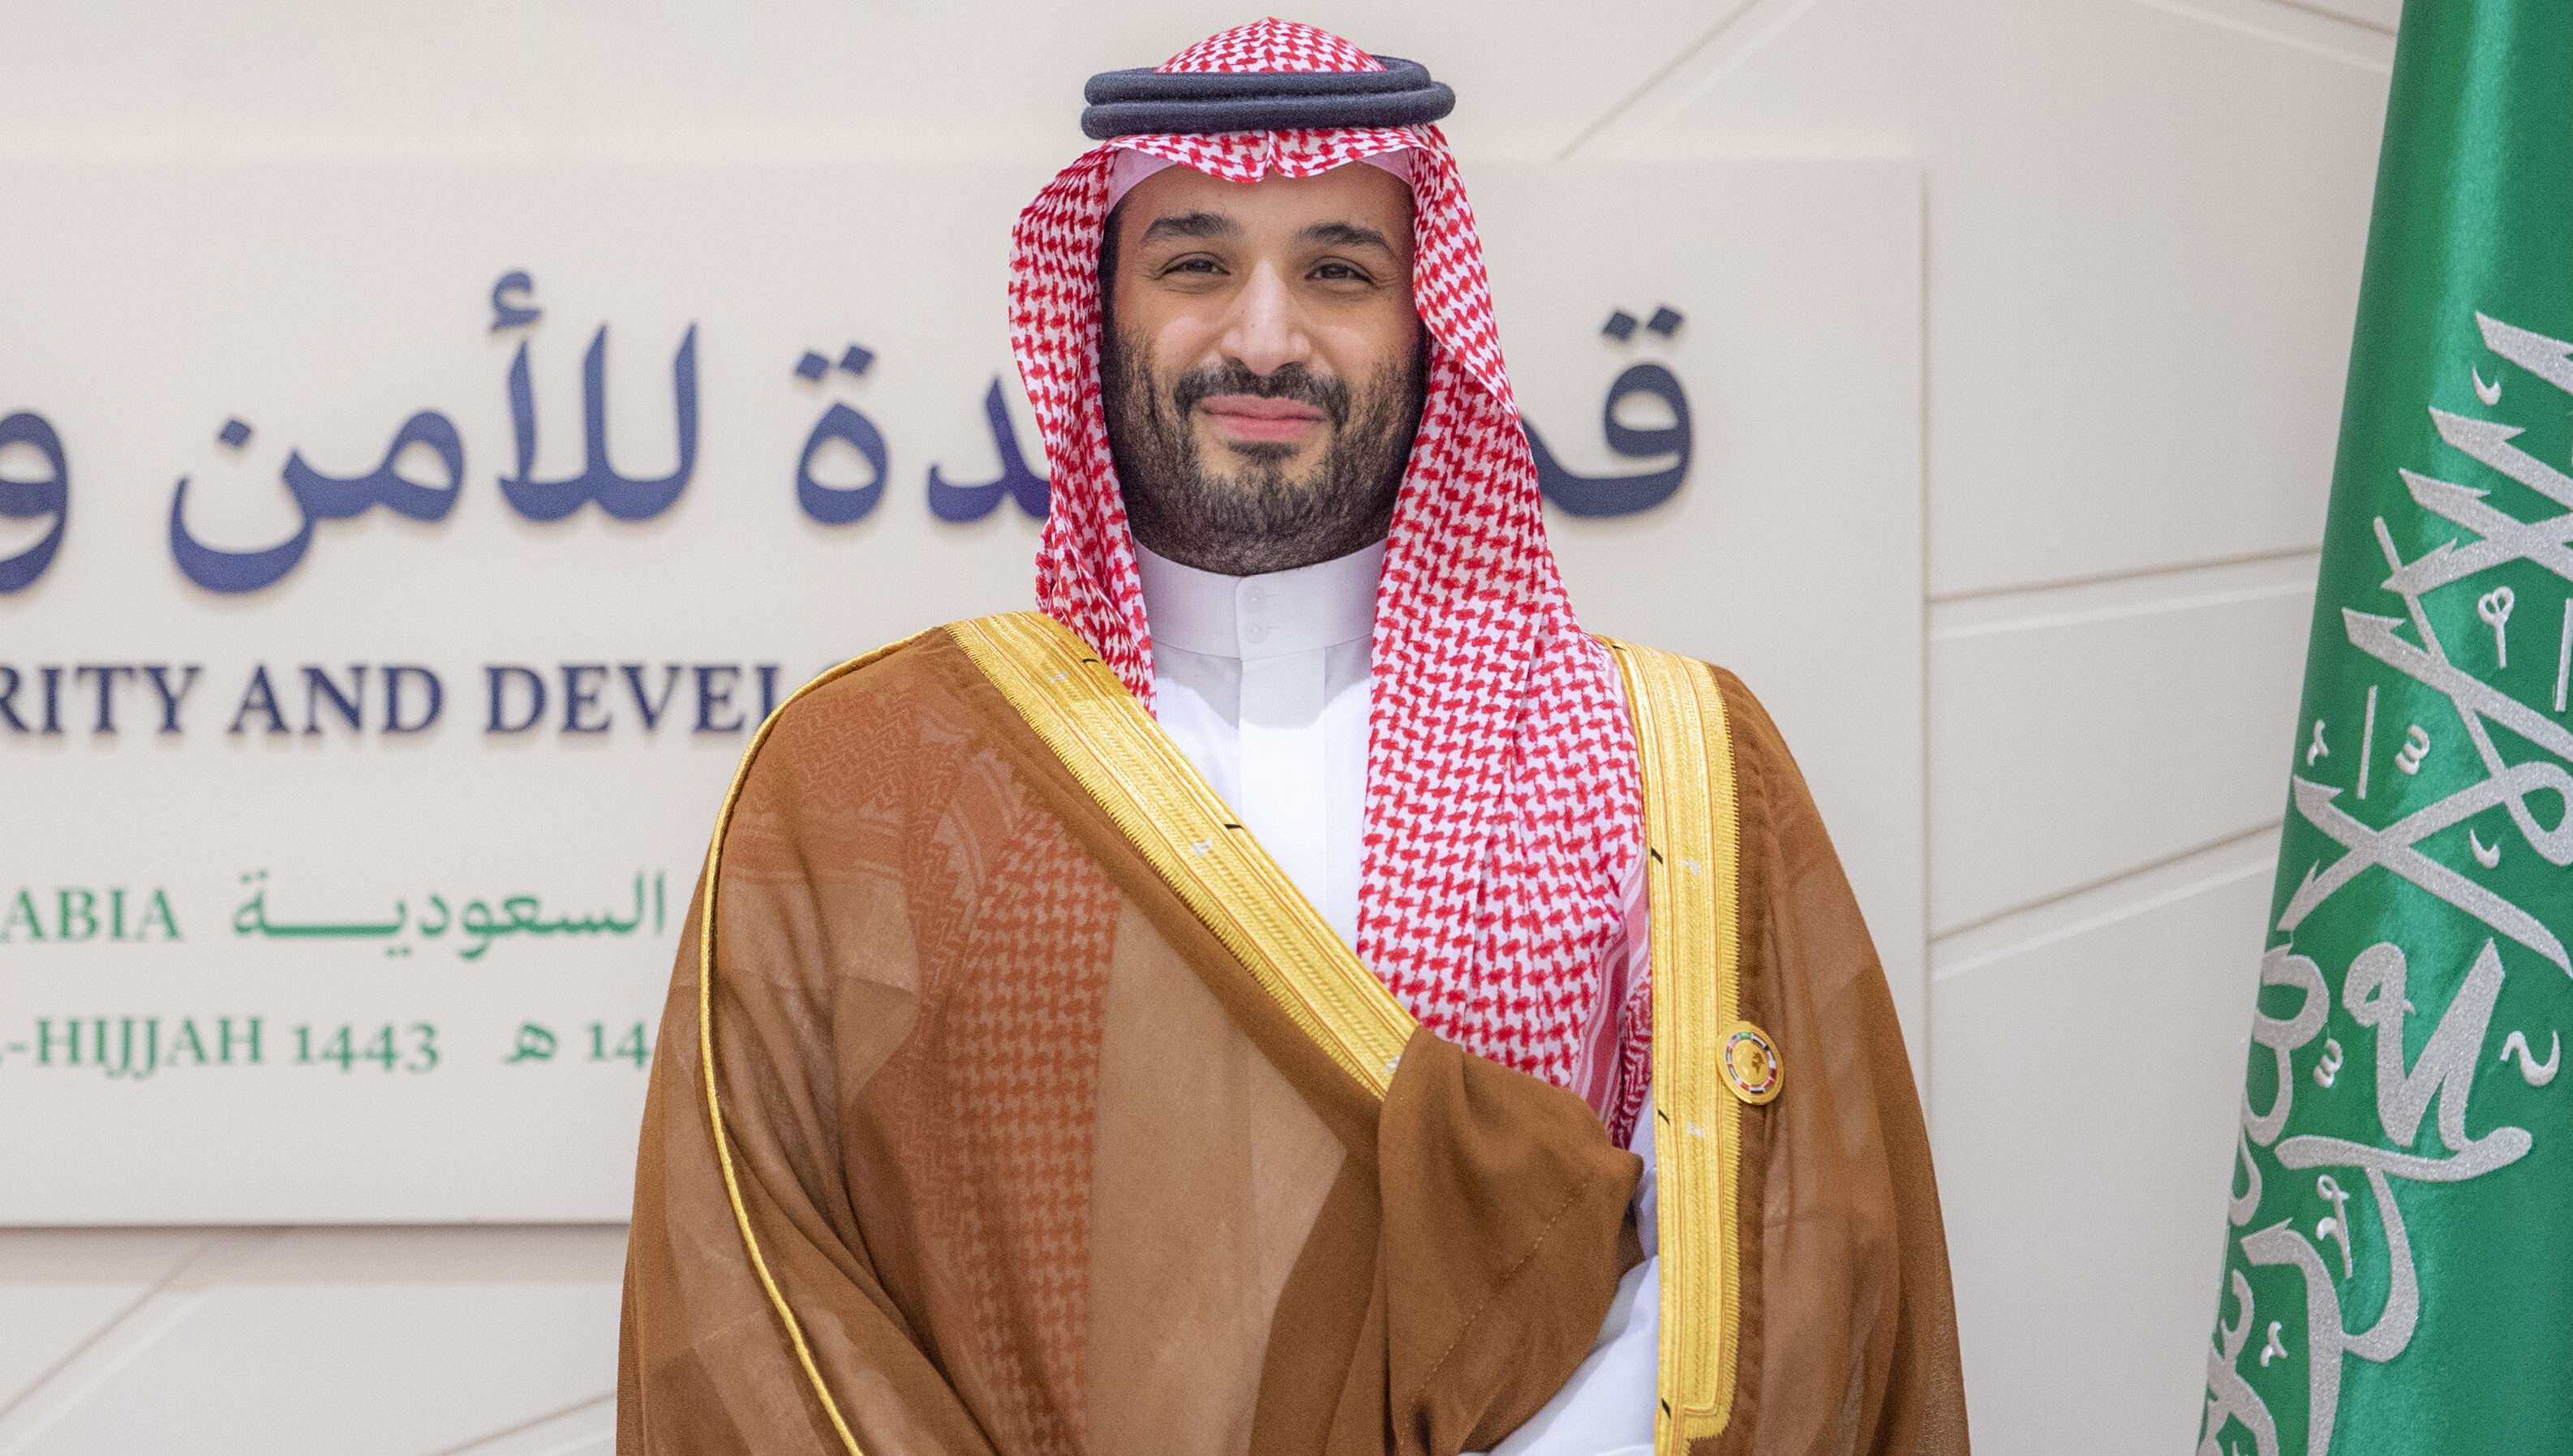  Saudi Arabia wants to spend $13B to buy a 'leading game publisher' 